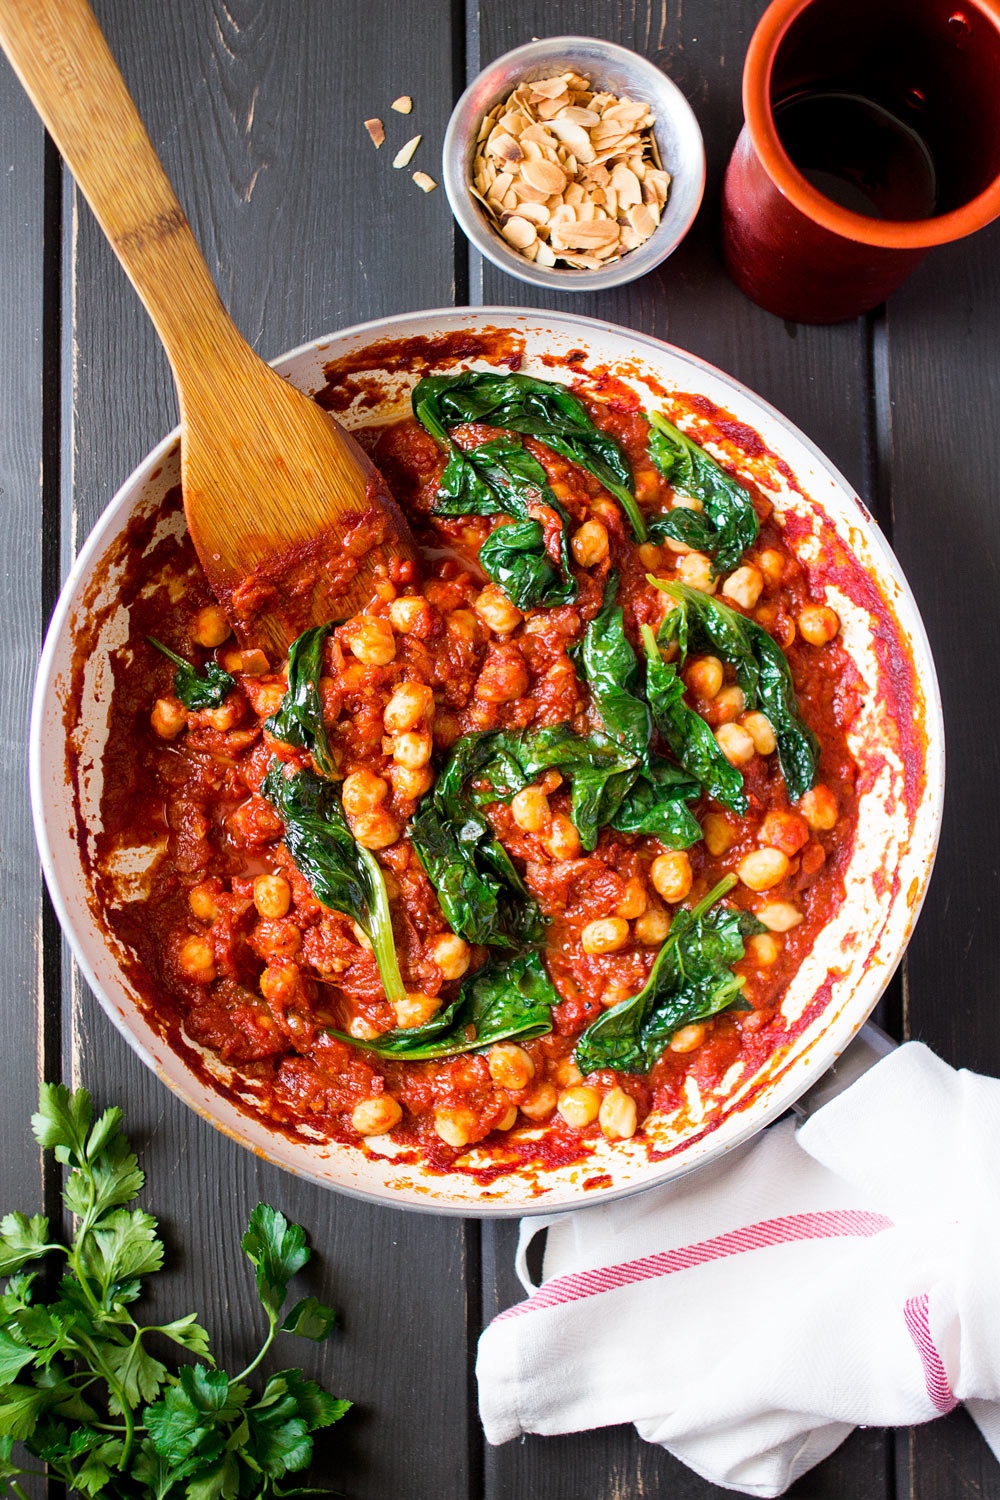 Spanish chickpea and spinach stew - Lazy Cat Kitchen